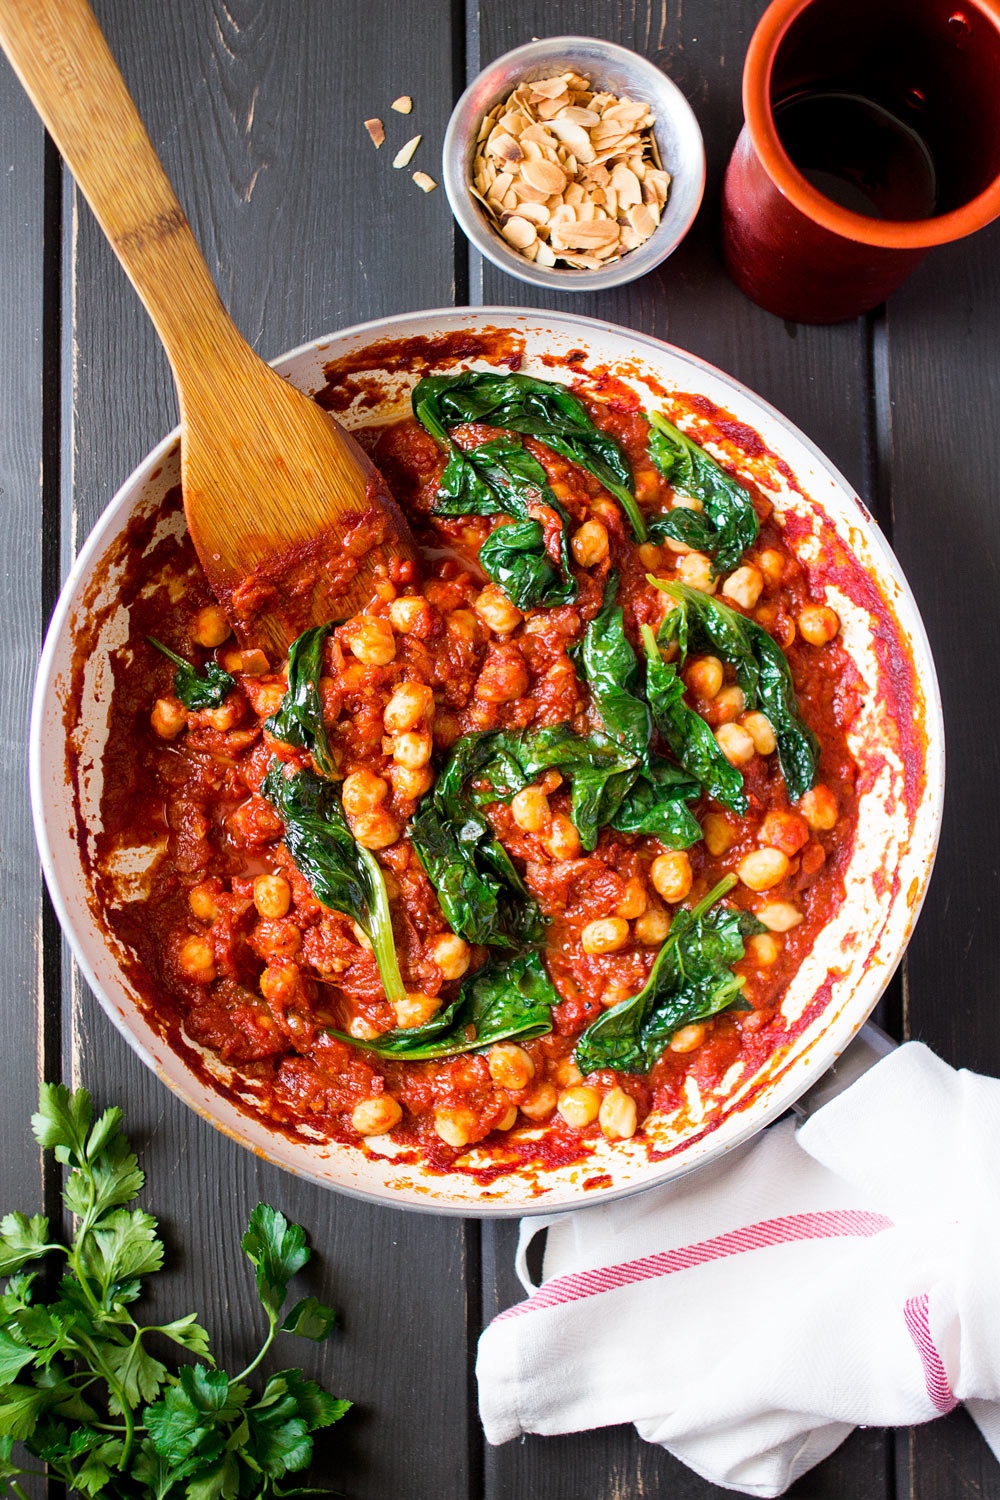 Spanish chickpea and spinach stew - Lazy Cat Kitchen